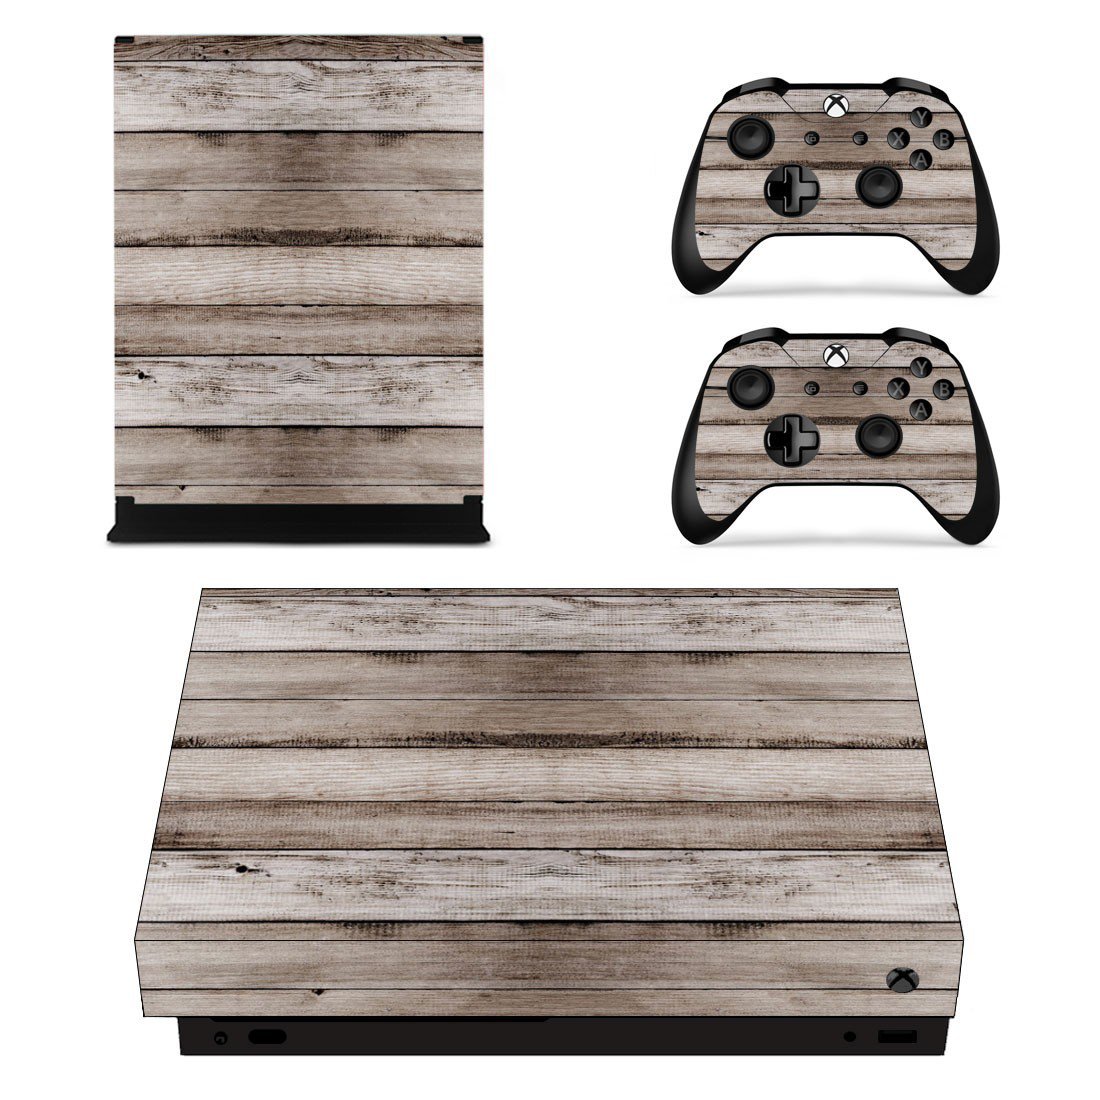 Wooden Baord Skin Sticker Decal for Xbox One X